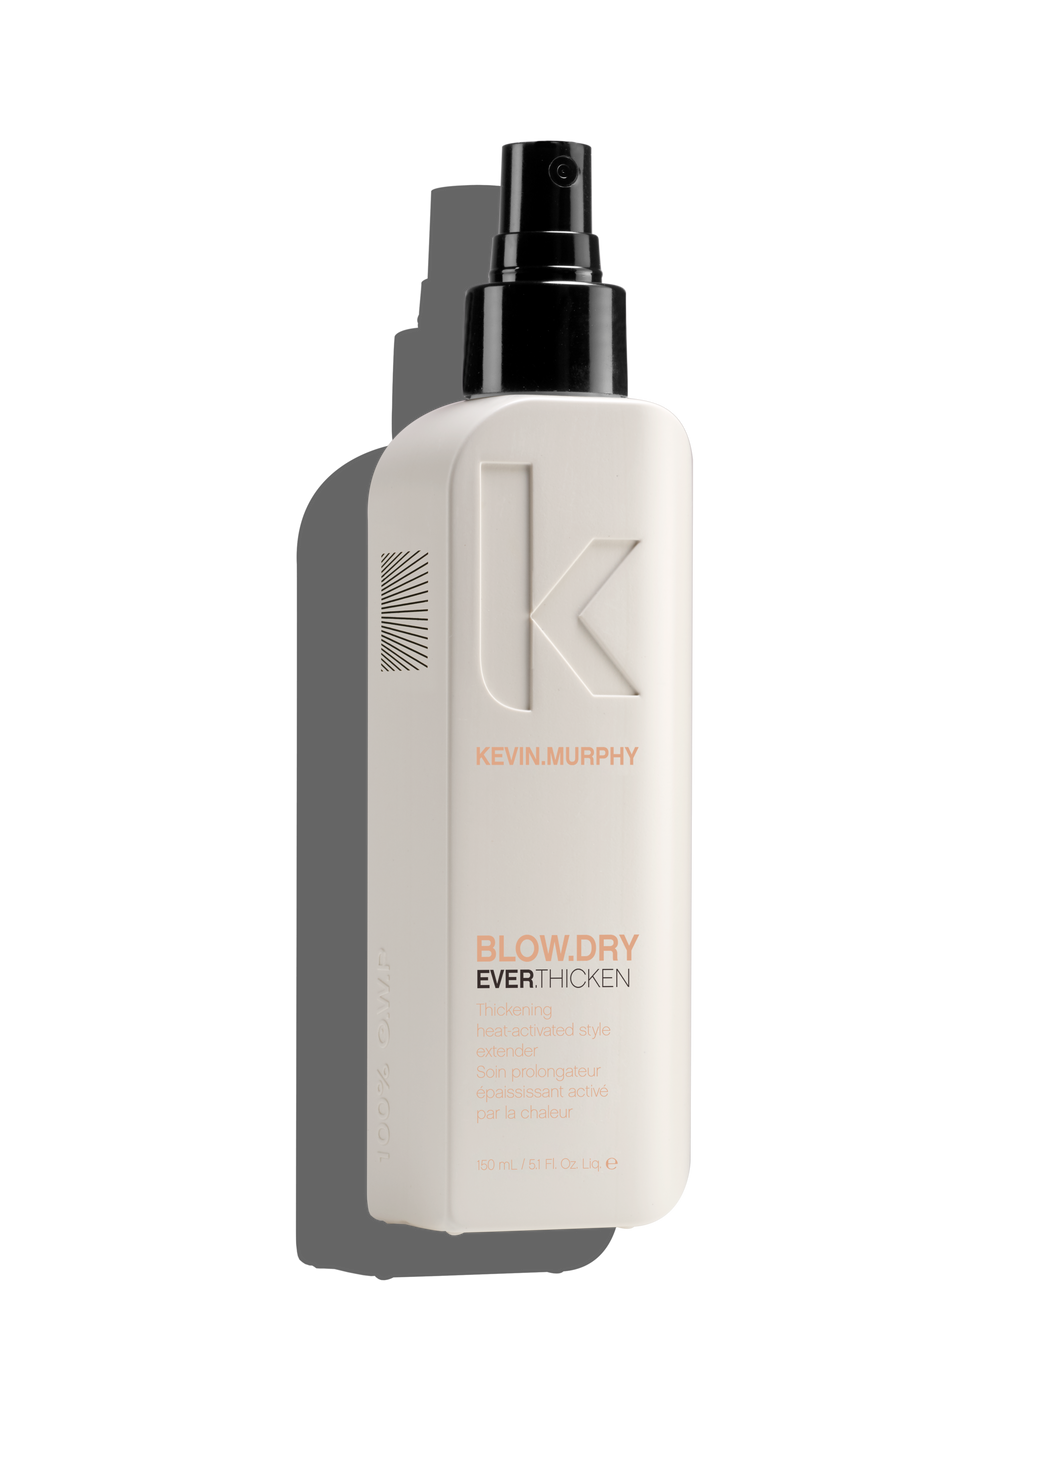 Kevin Murphy - blow dry ever thicken 150ml Activated by the heat of your blow dryer, this lightweight spray creates thicker fuller hair, that lasts. Helps lock out humidity to seal in a longer lasting blow dry.